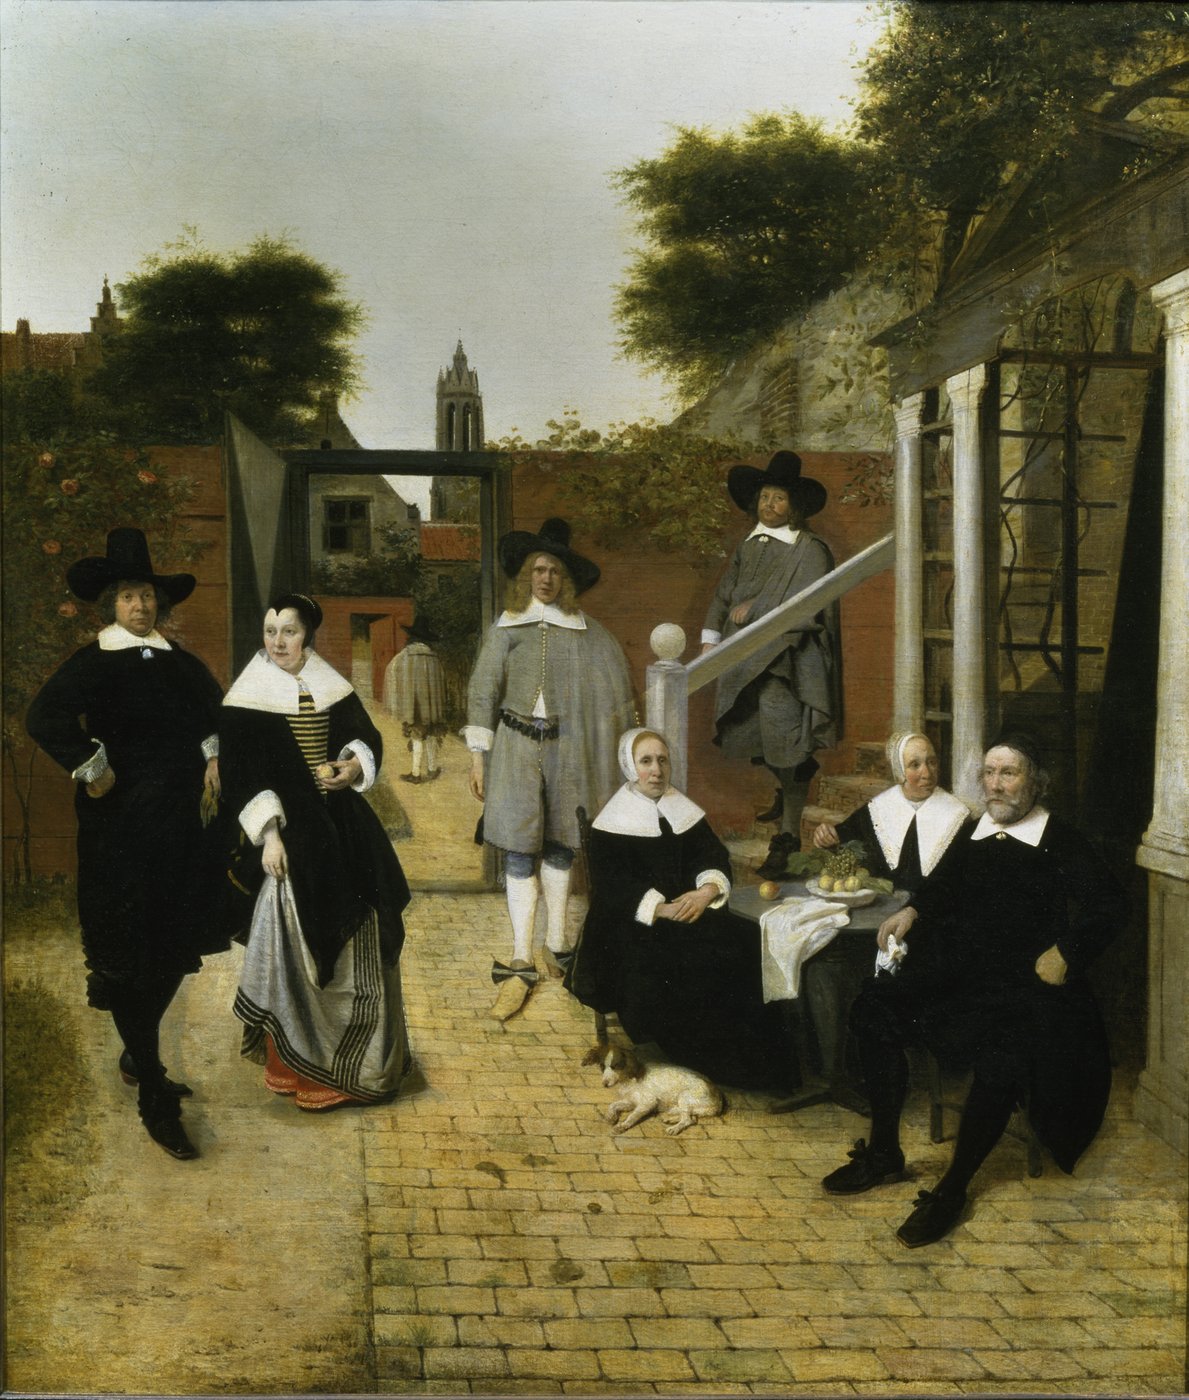 The painting is a depiction of a family grouped in a courtyard. The family members take different positions and postures. The younger ones are spread out in the courtyard, while the older ones are sitting together at a table. The portrayed people appear rigid and staged. Their stern postures reflect the straight lines of the courtyard walls and the architecture in the middle and background. All wear black or grey robes with large white collars and headdresses. Through the courtyard door, the view can glide backwards to a church tower. Every brushstroke seems to be thought out and controlled in order to reproduce the perspective, the architecture as well as the figures as realistic as possible.